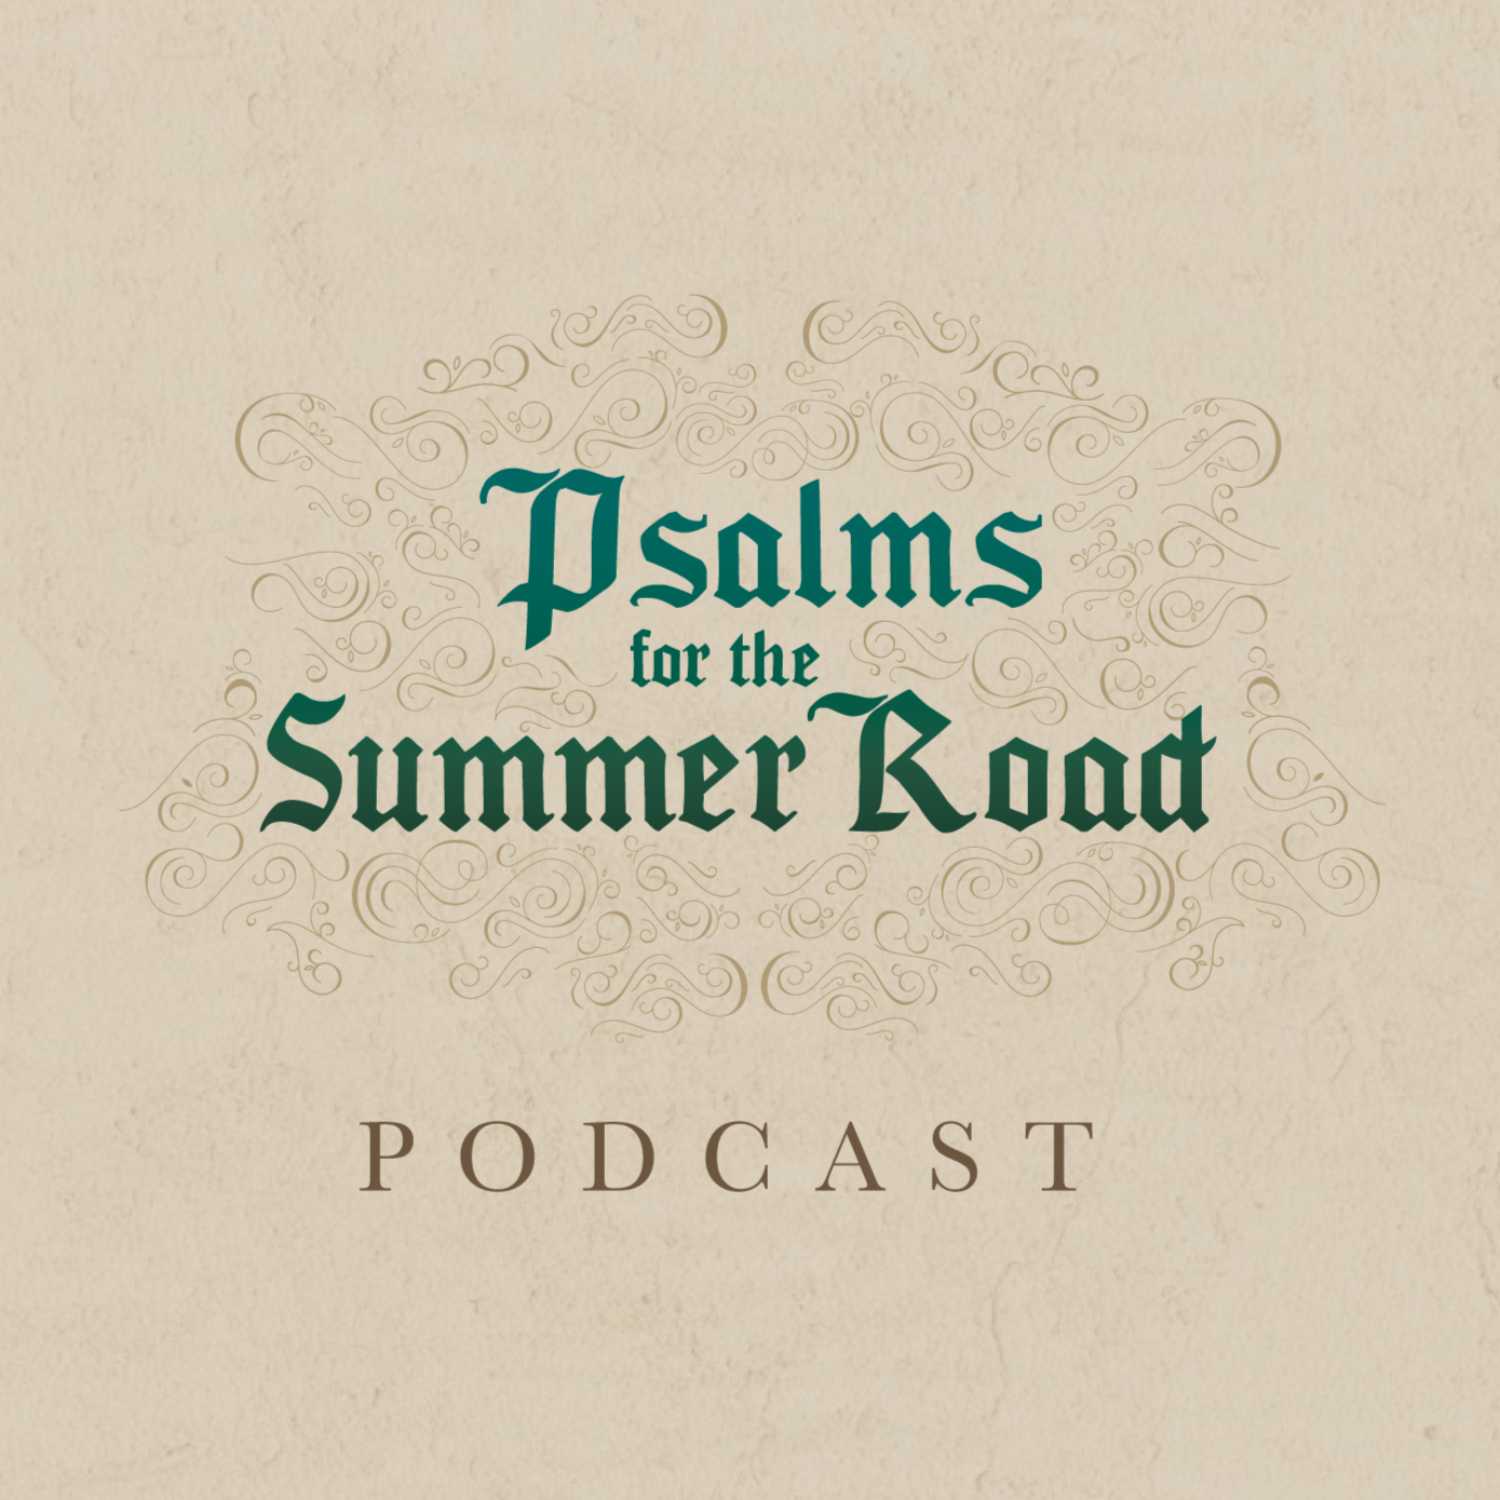 Psalms for the Summer Road